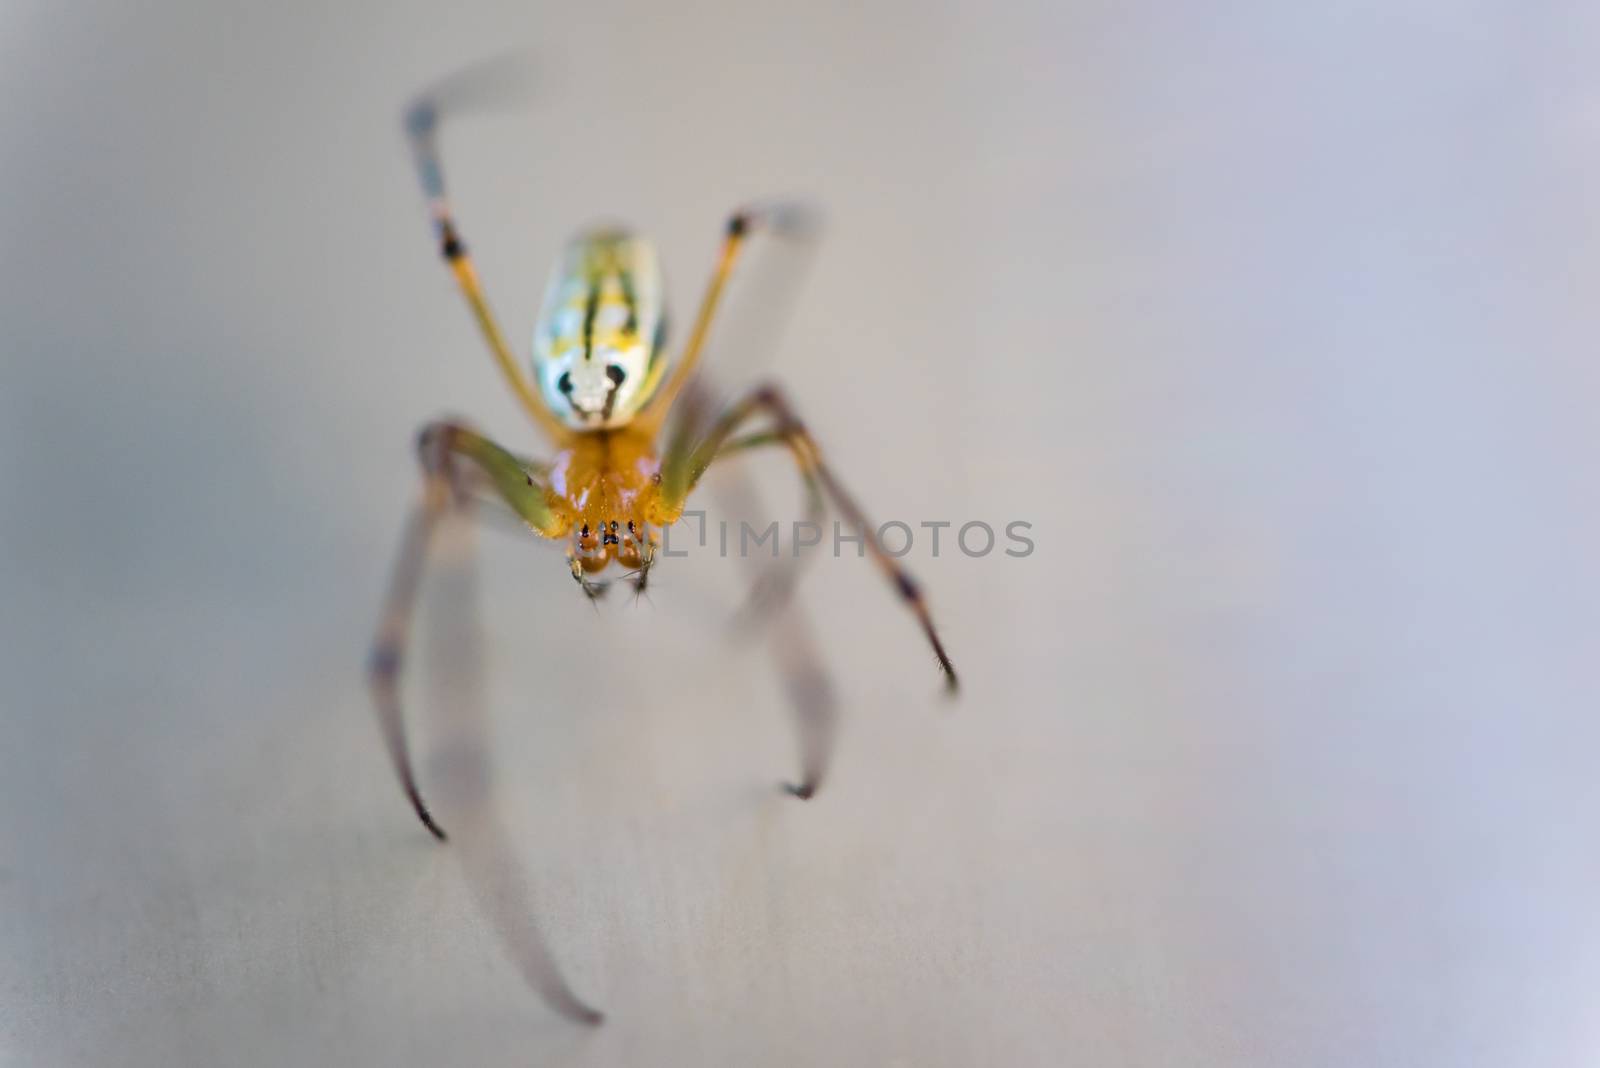 A macro shot of a very small brown and yellow spider.